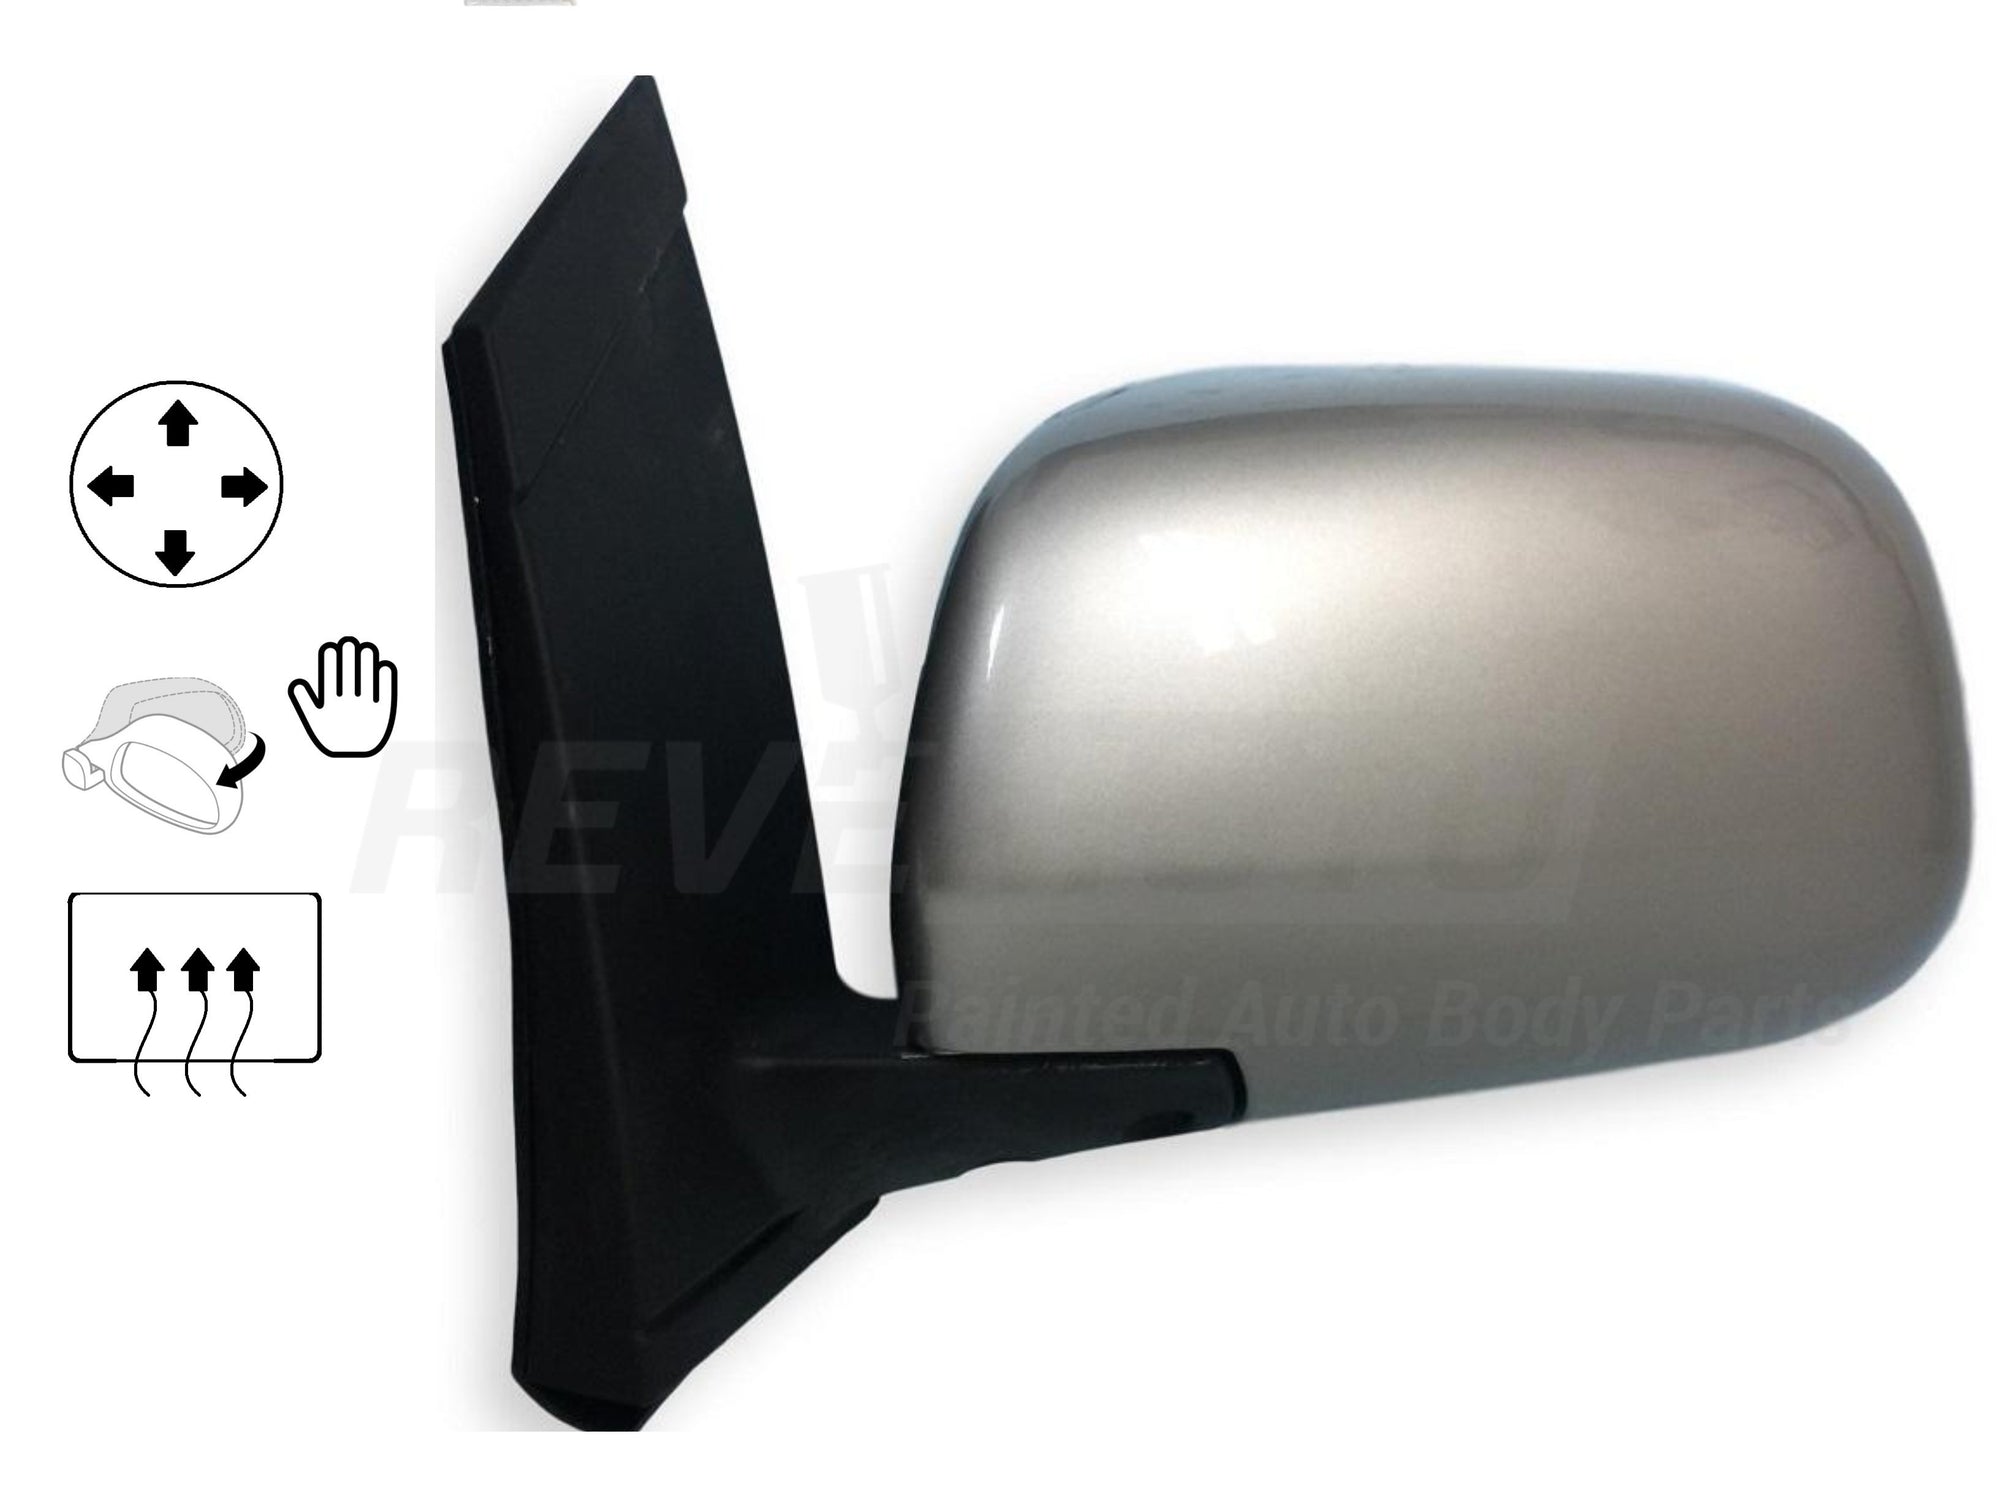 2006_Toyota_Sienna_Driver_Side_View_Mirror_Power_Manual_Folding_Heated_wo_Auto_Dimming_Painted_Silver_Shadow_Pearl_1D7_87940AE020